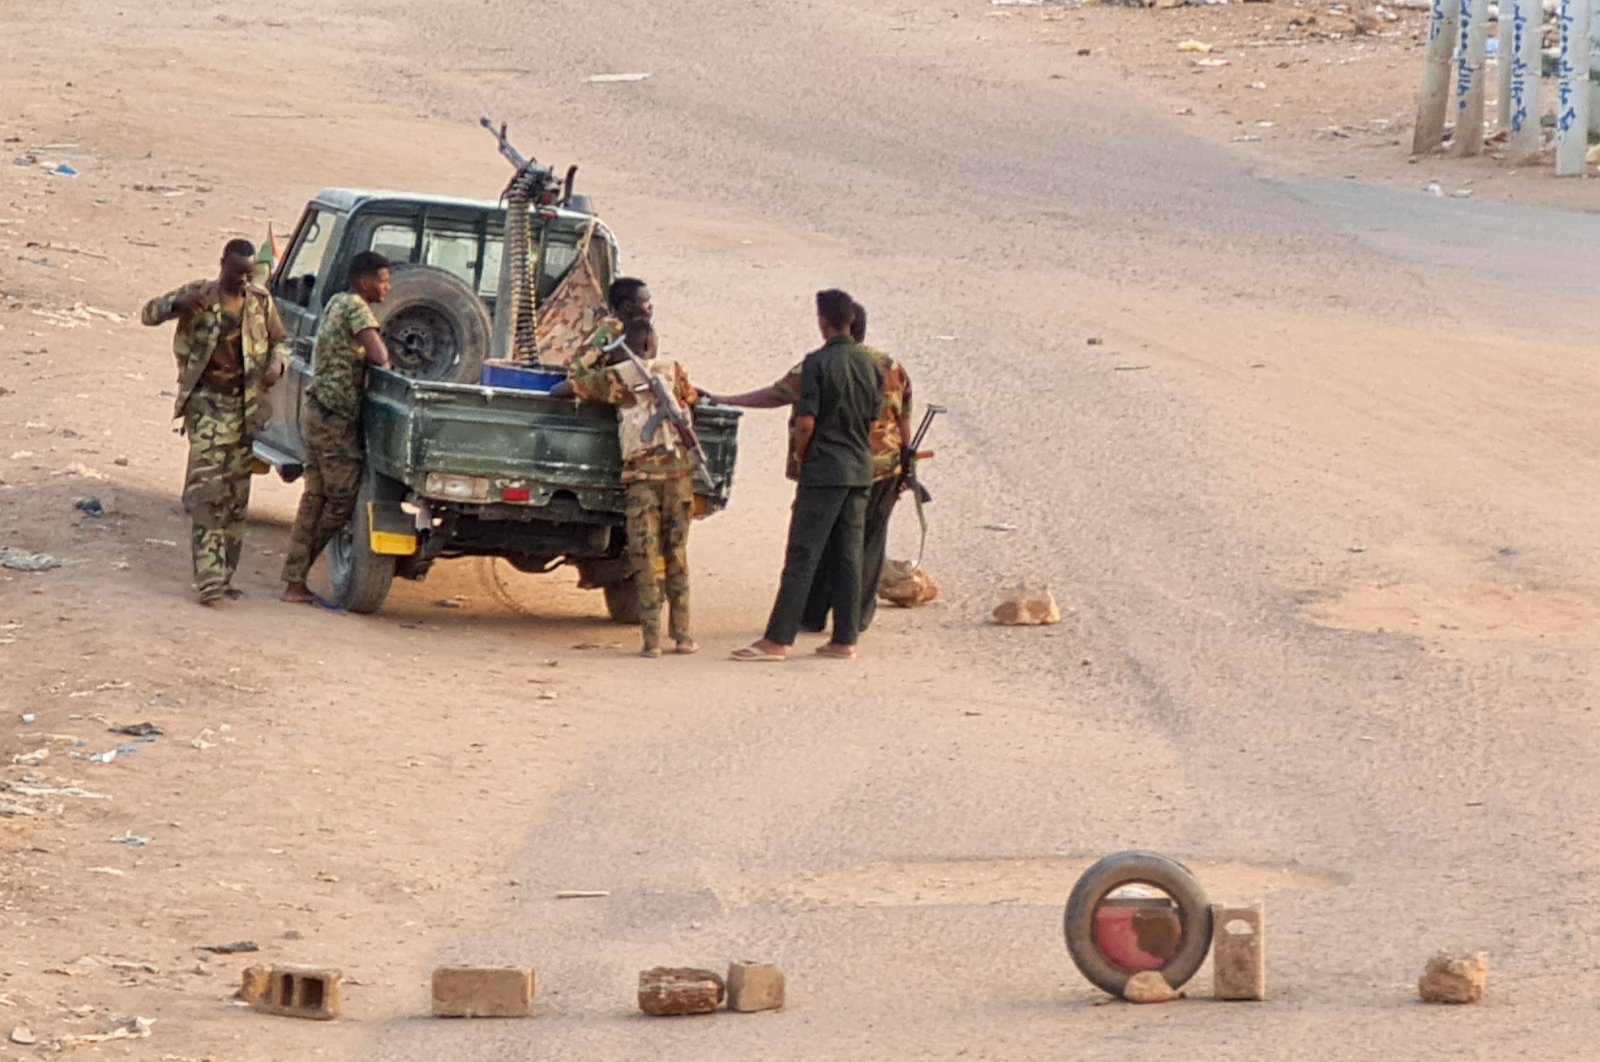 Sudanese army troops stand near their vehicle on a road in Khartoum, Sudan, May 20, 2023. (AFP Photo)